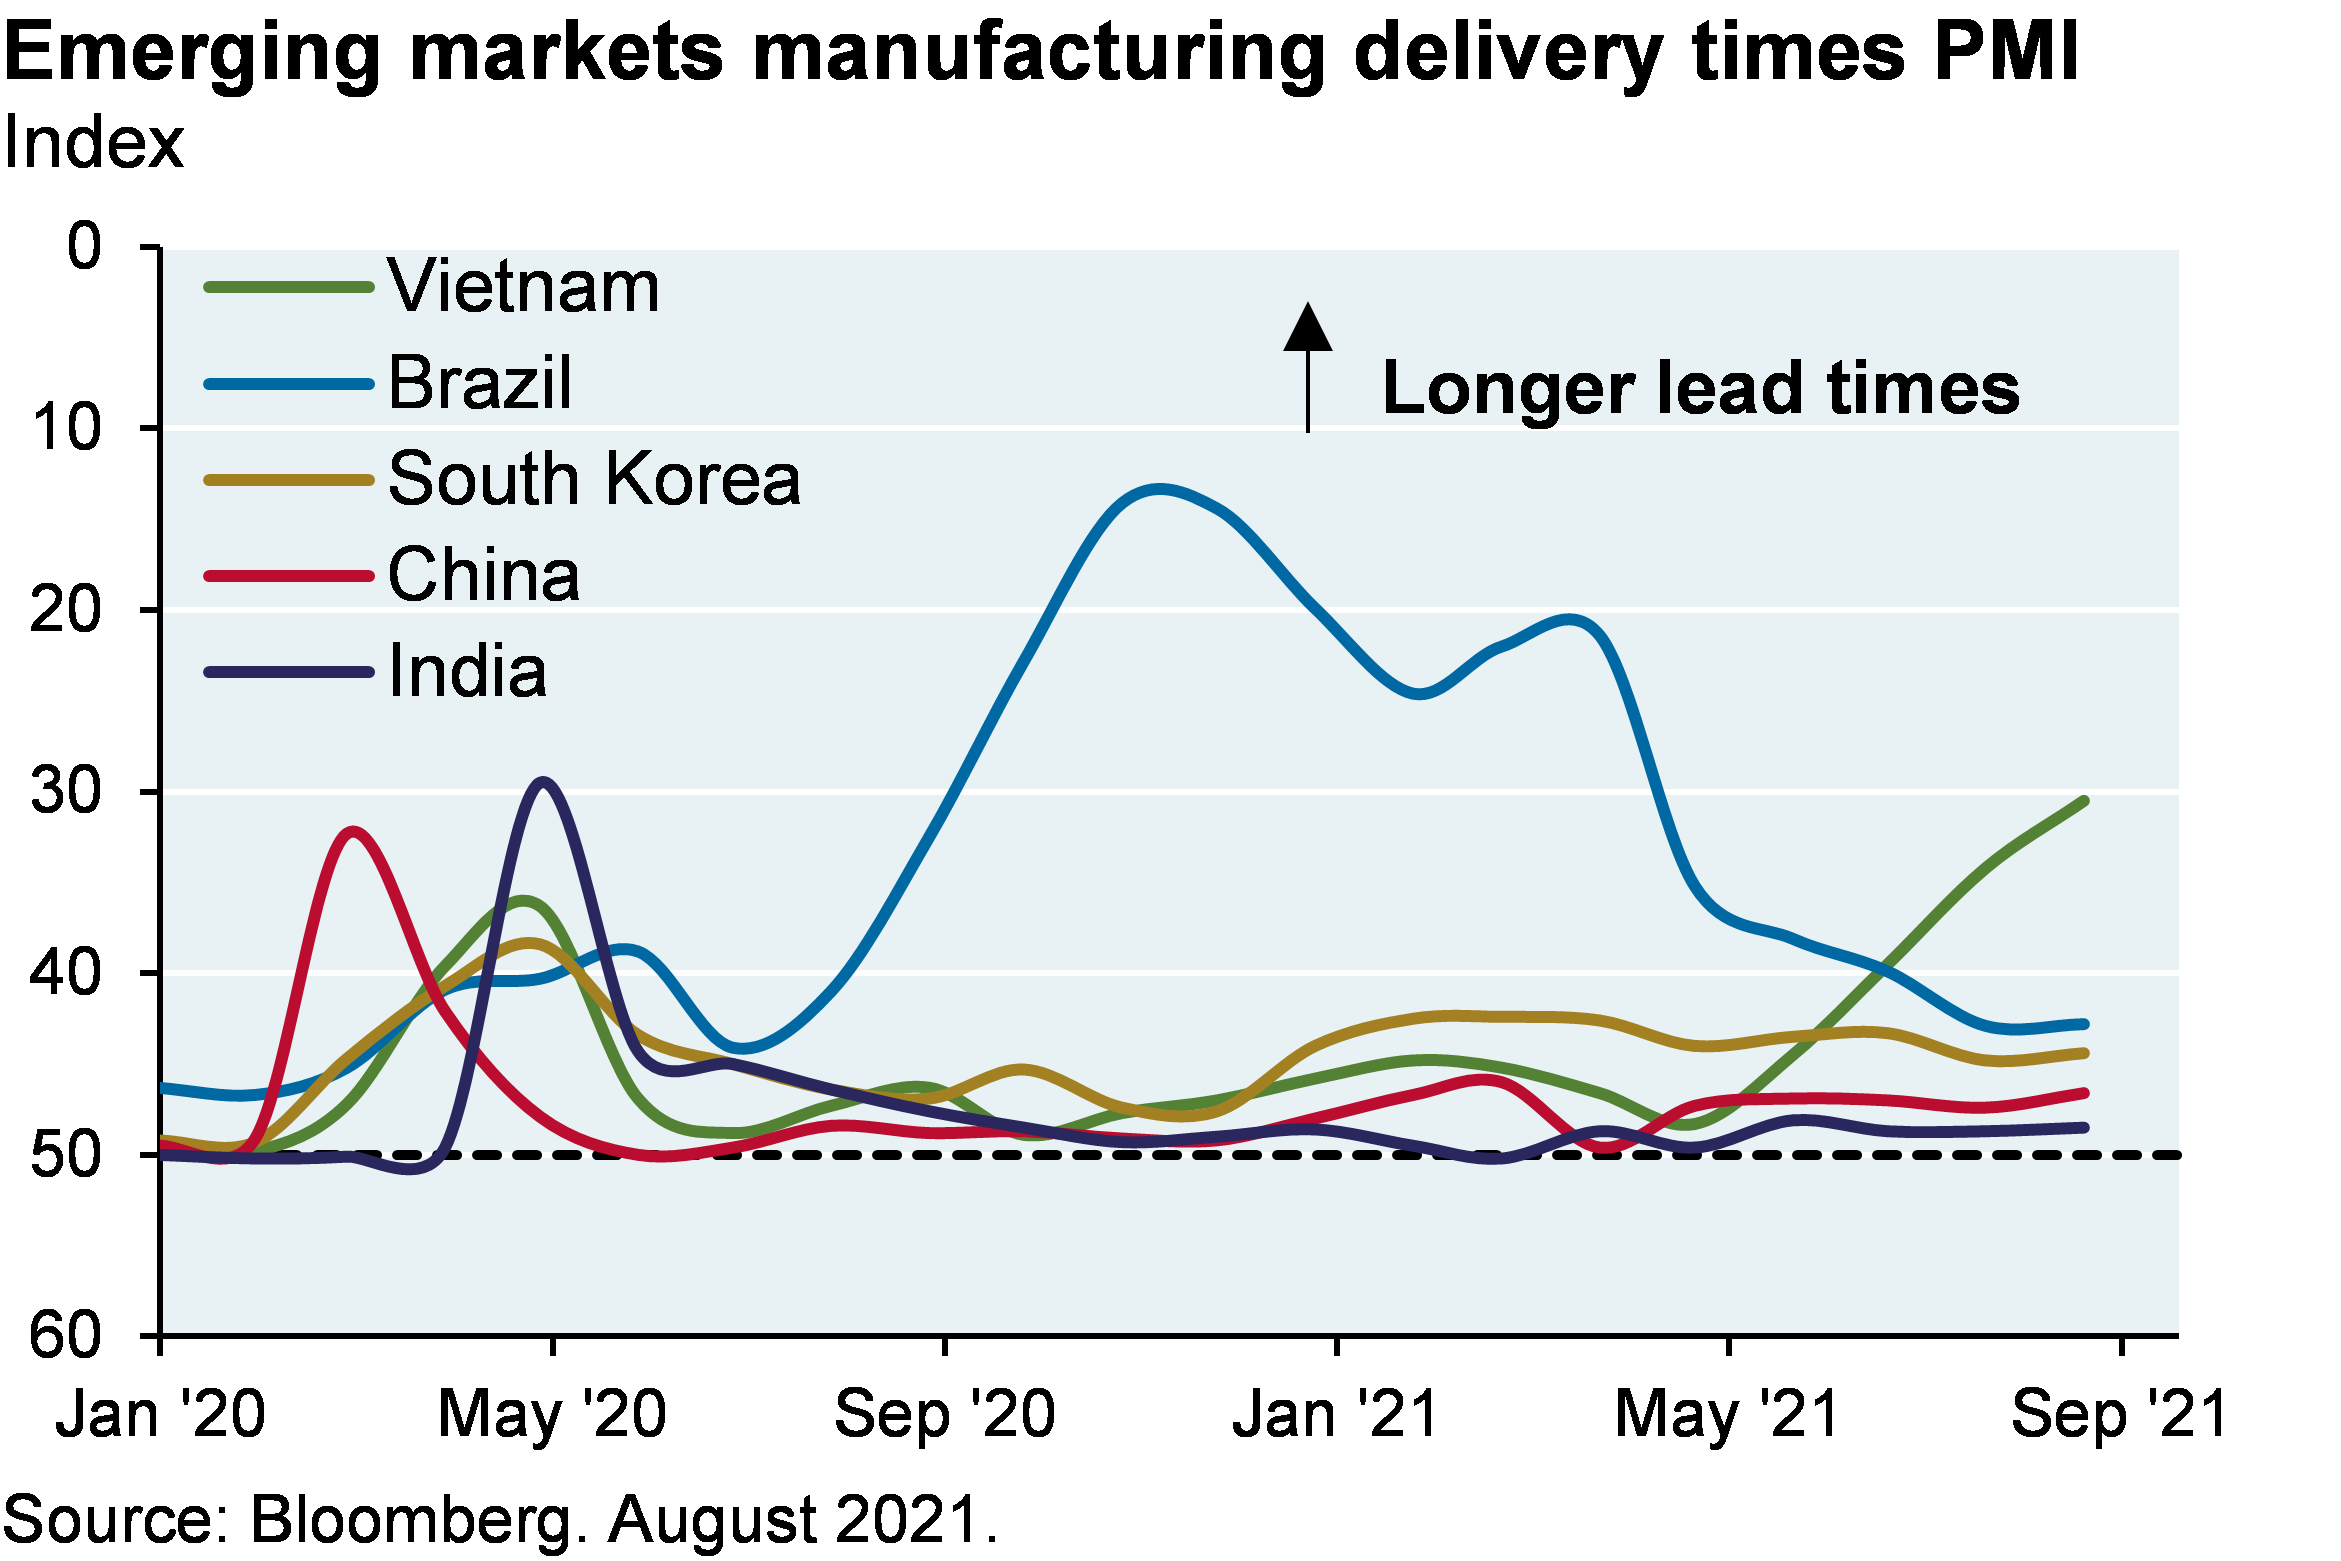 Line chart shows index levels for Vietnam, India, China, South Korea and Brazil manufacturing delivery times. After recovering from small increases in lead times at the start of COVID, delivery times have not changed significantly for India, China and South Korea. Brazil demonstrated a larger increase in delivery times (around 10 at its worst), but has recovered to about 42. Vietnam is currently seeing a spike in delivery times to around 30, after having been between 40 and 50 for most of the period since January 2020.